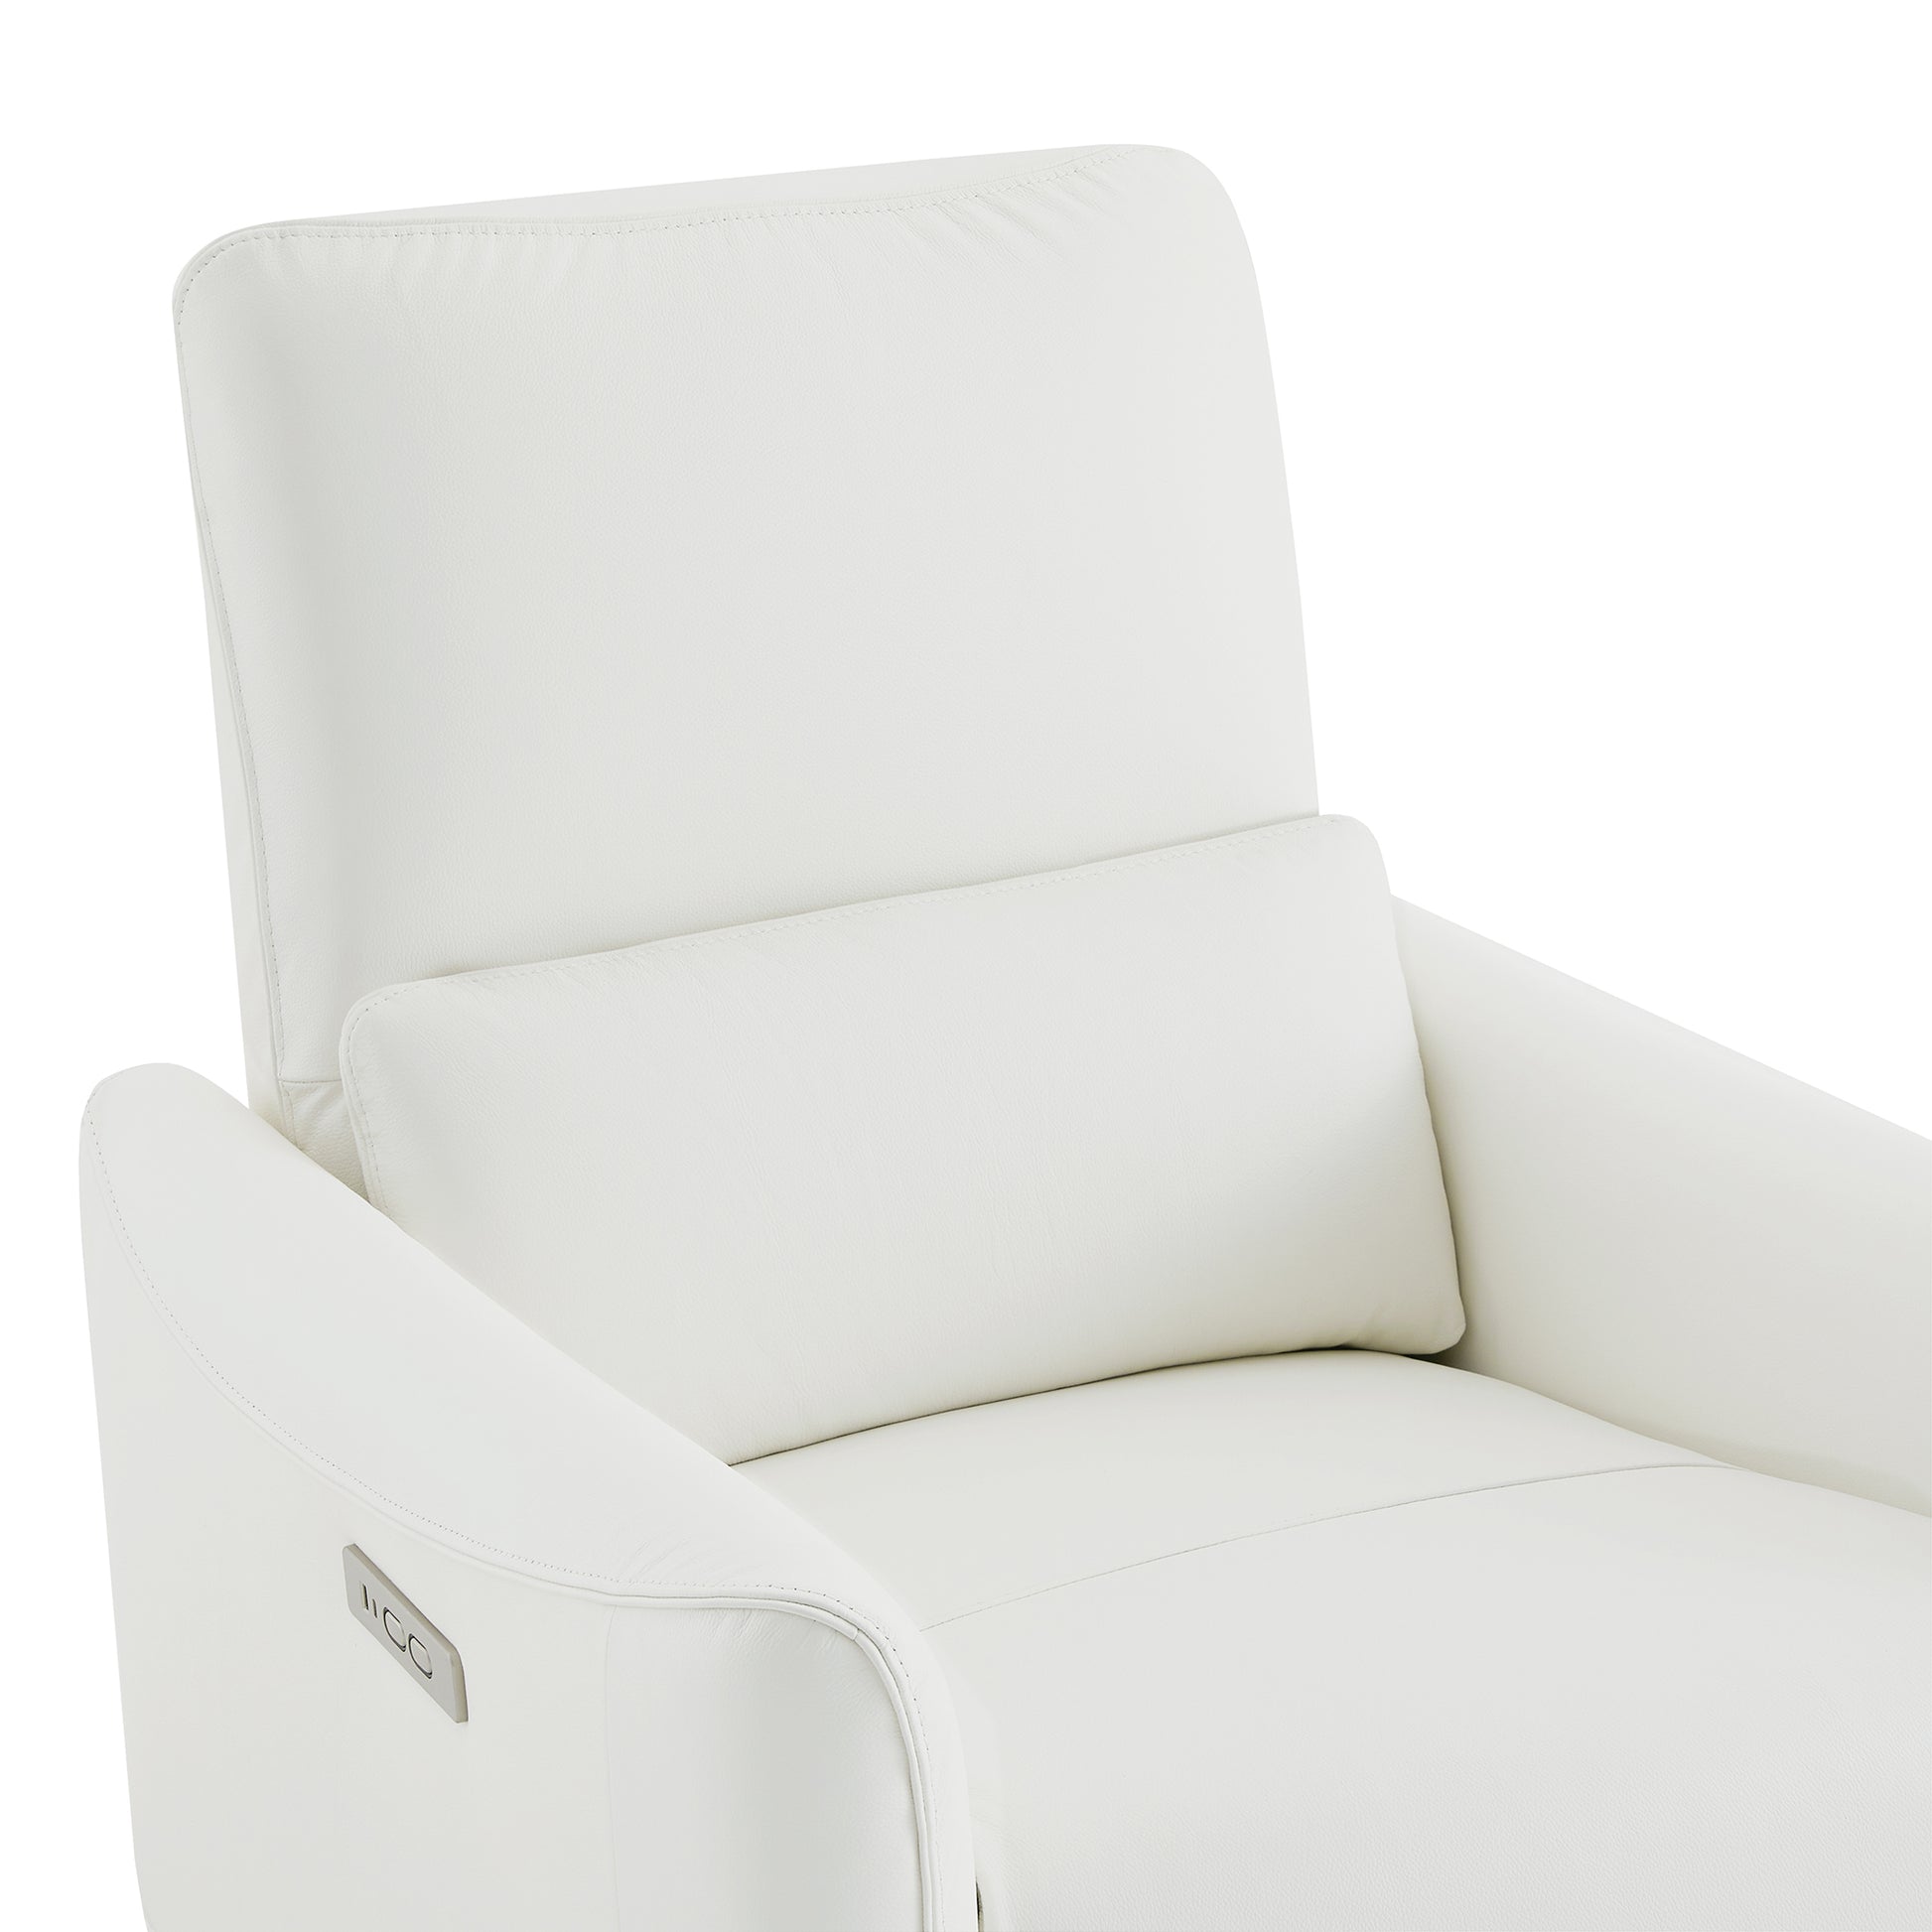 CHITA LIVING-Tracee Modern Power Swivel Glider Recliner-Recliners-Genuine Leather-White-